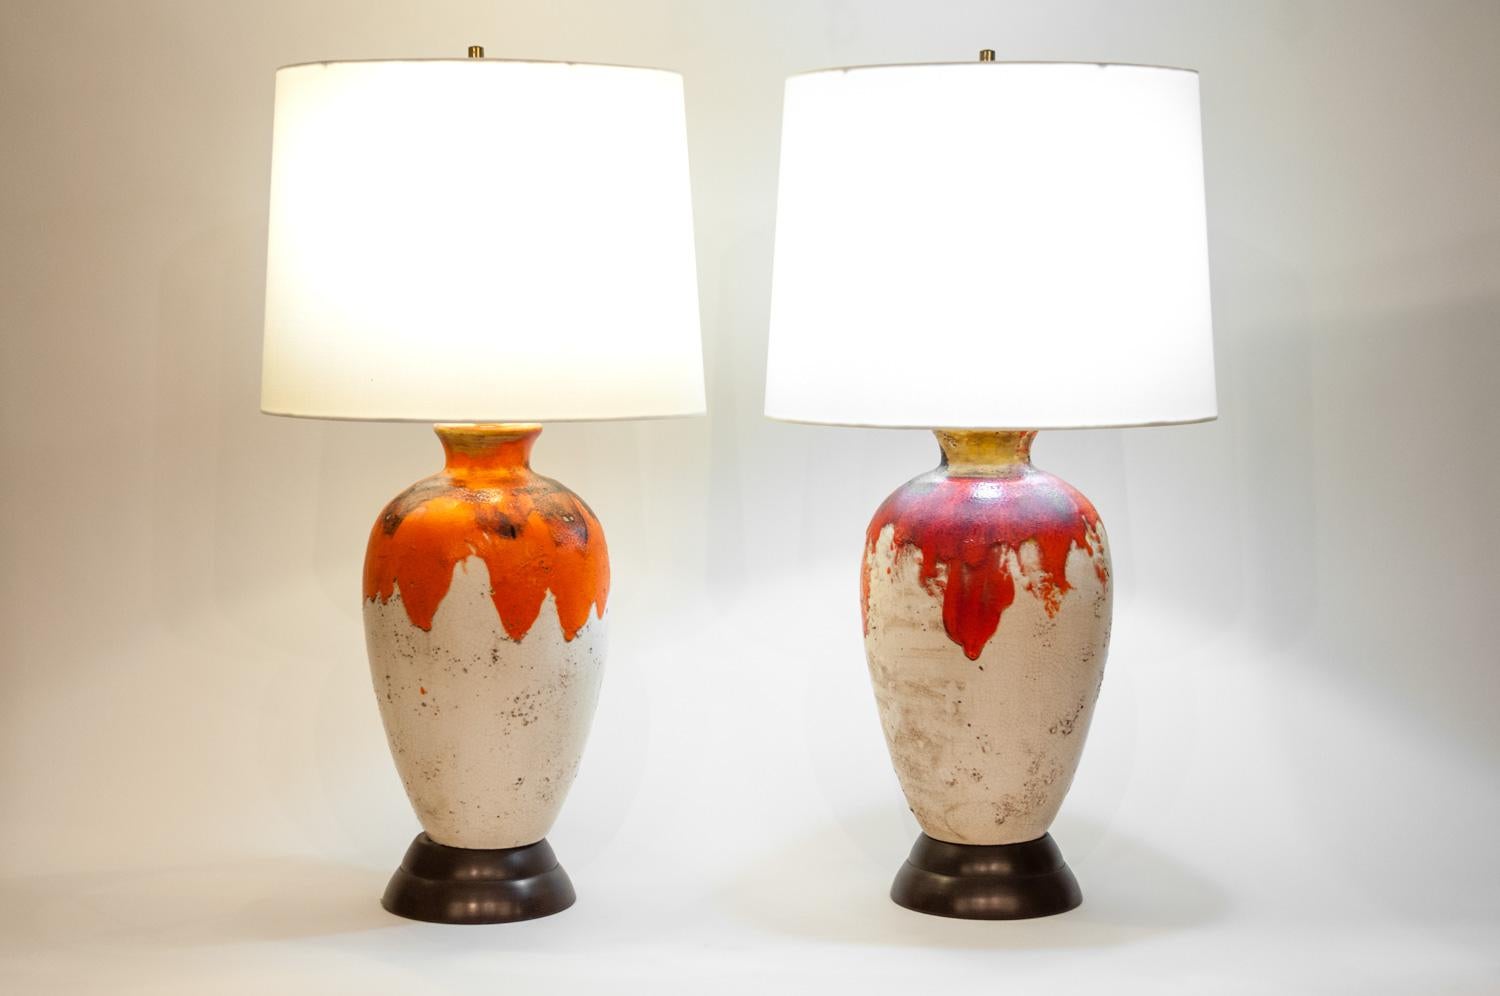 Vintage pair drip glazed porcelain task or table lamps with brass bass. Each lamp is in excellent working condition. Each lamp come with an oval drum shade with silk exterior. Each lamp measure from base to top of finial 33 inches high x 10 inches